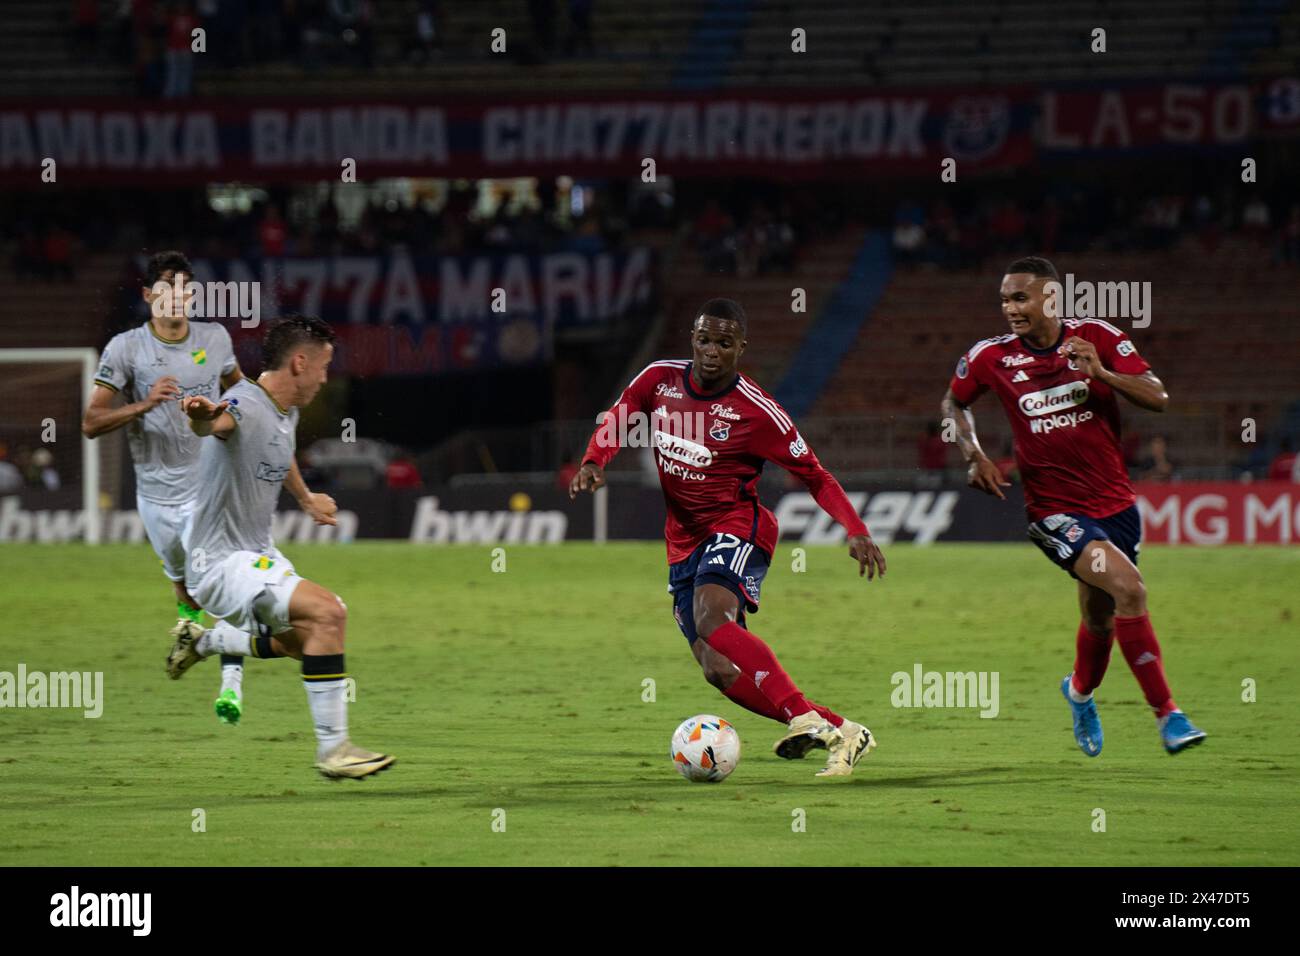 Medellin, Colombia. 25th Apr, 2024. Deportivo Independiente Medellin's Jimer Esteban Fory (C) during the Conmebol Sudamericana match between Deportivo Independiente Medellin V Defensa y Justicia in Medellin, Colombia, April 25, 2024. Photo by: Camilo Moreno/Long Visual Press Credit: Long Visual Press/Alamy Live News Stock Photo